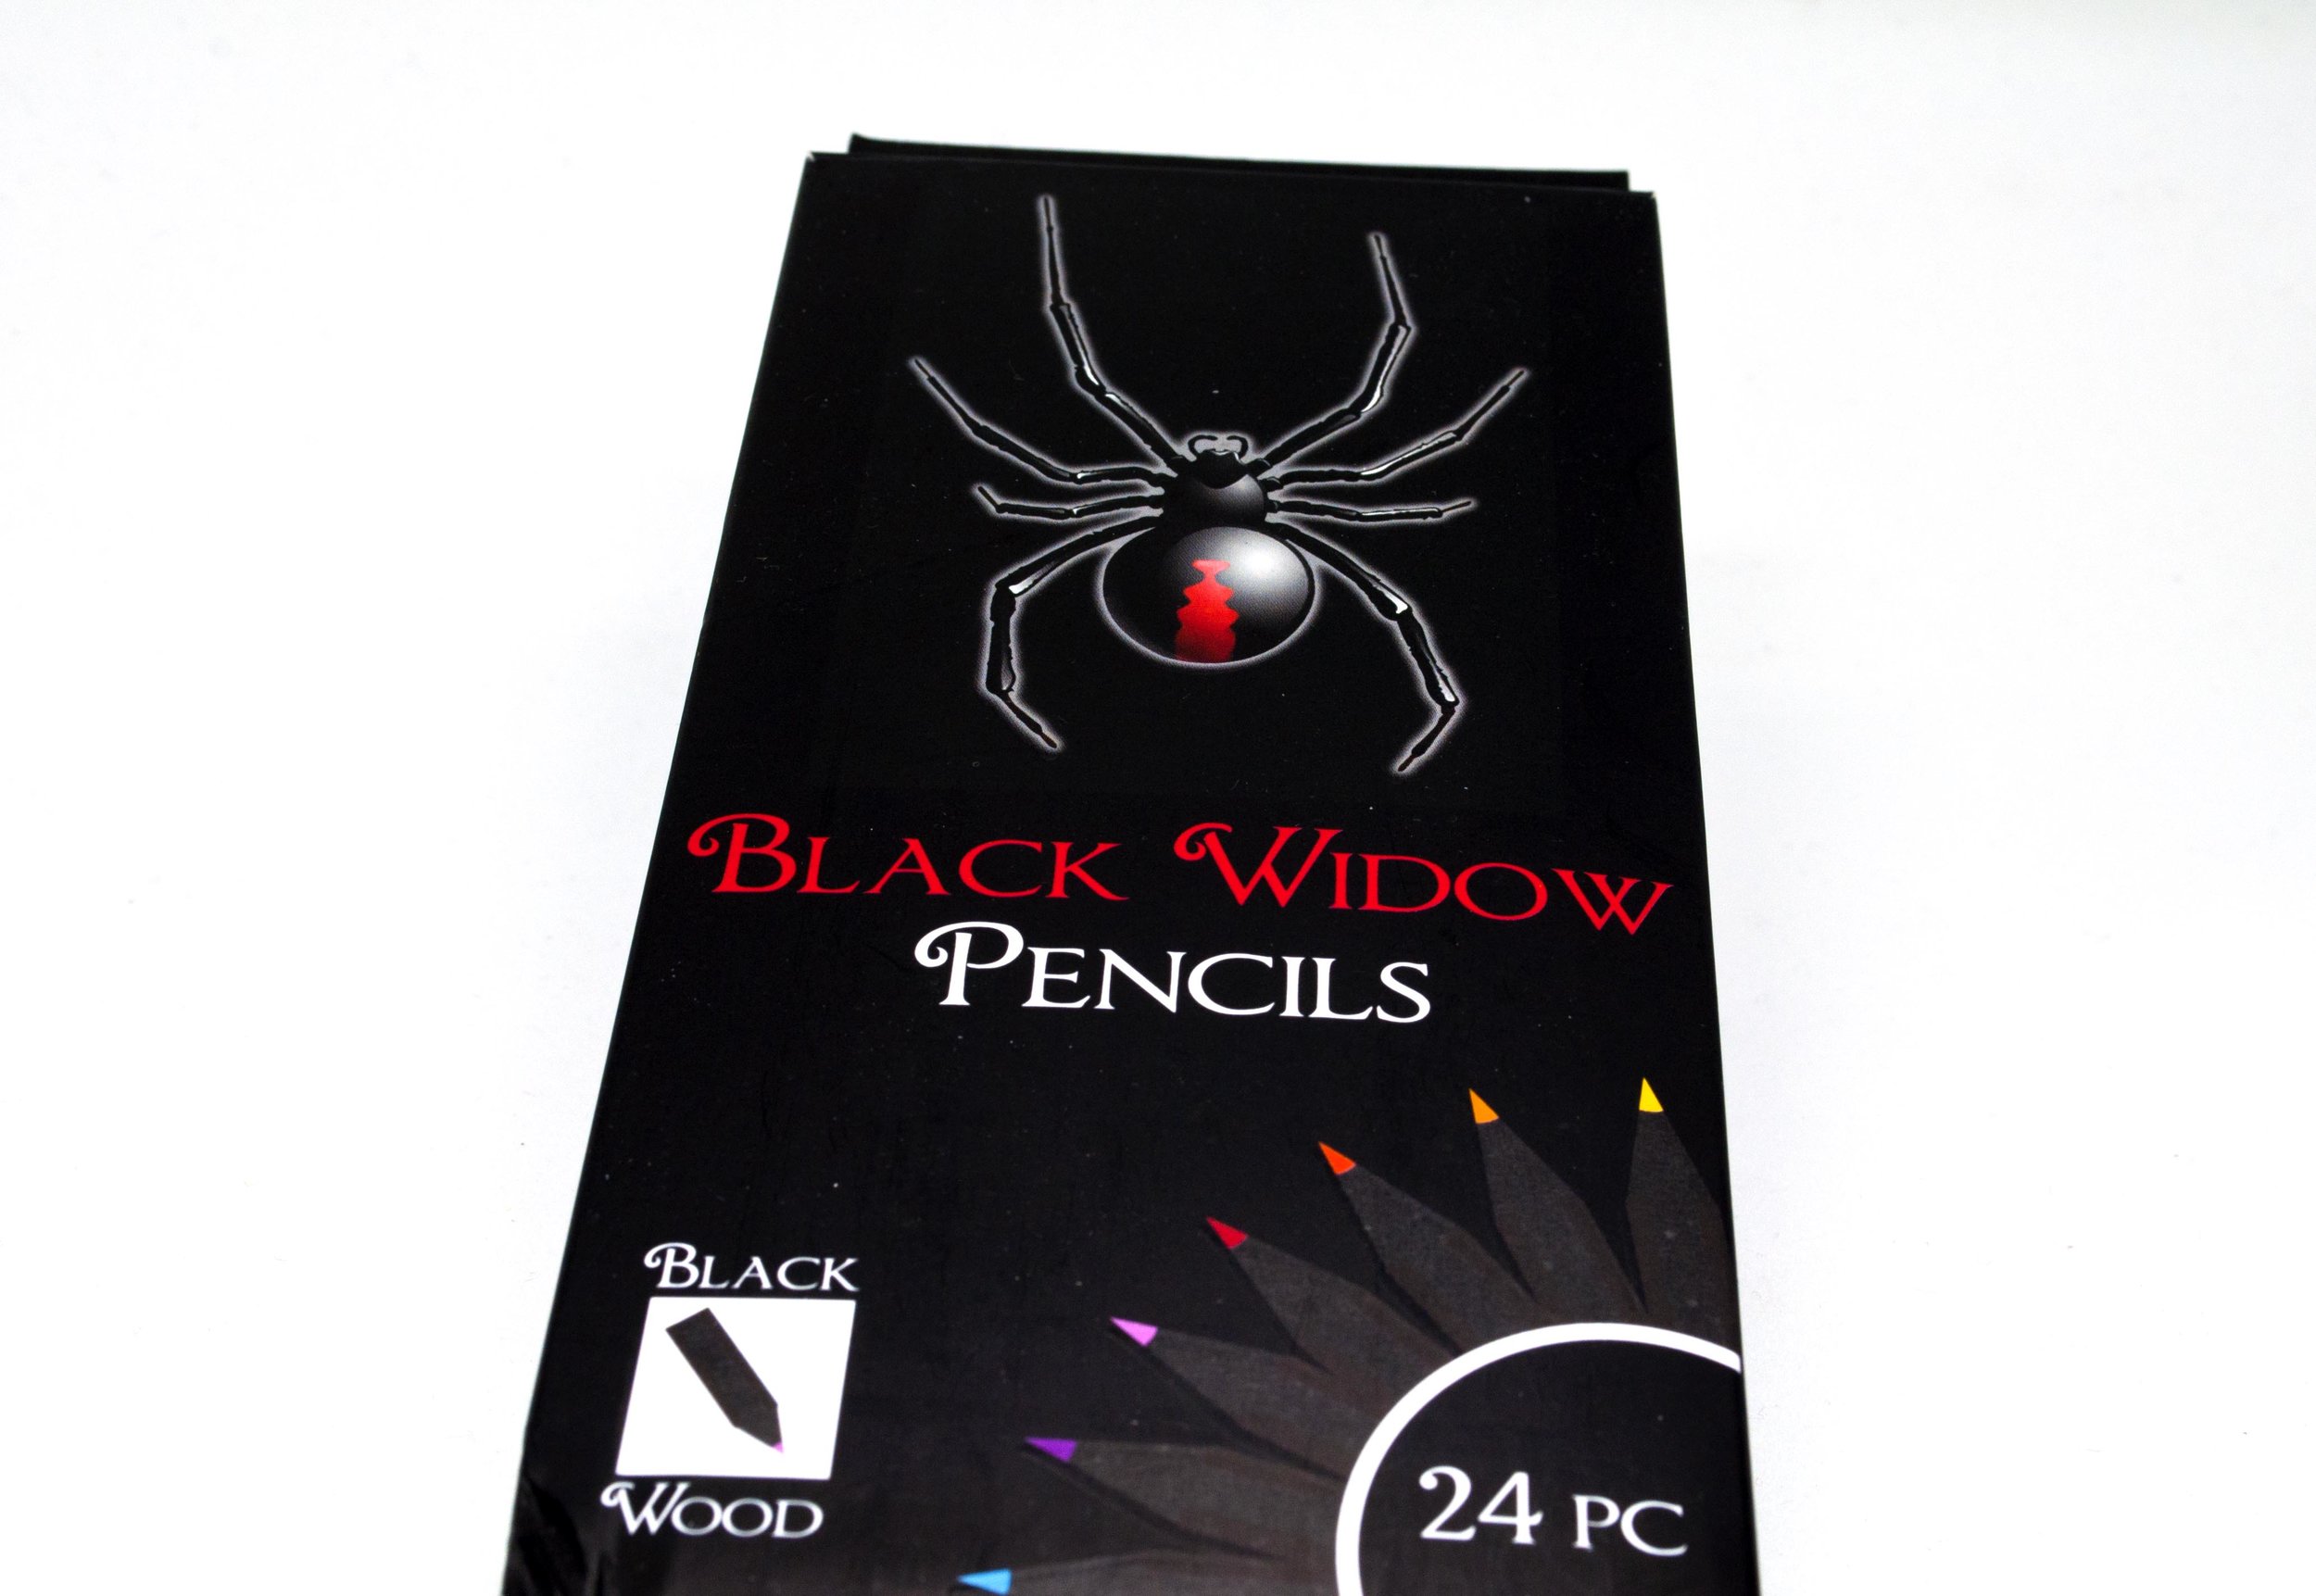  Black Widow Colored Pencils For Adult Coloring - 24 Coloring  Pencils With Smooth Pigments - Best Color Pencil Set For Adult Coloring  Books And Drawing : Office Products